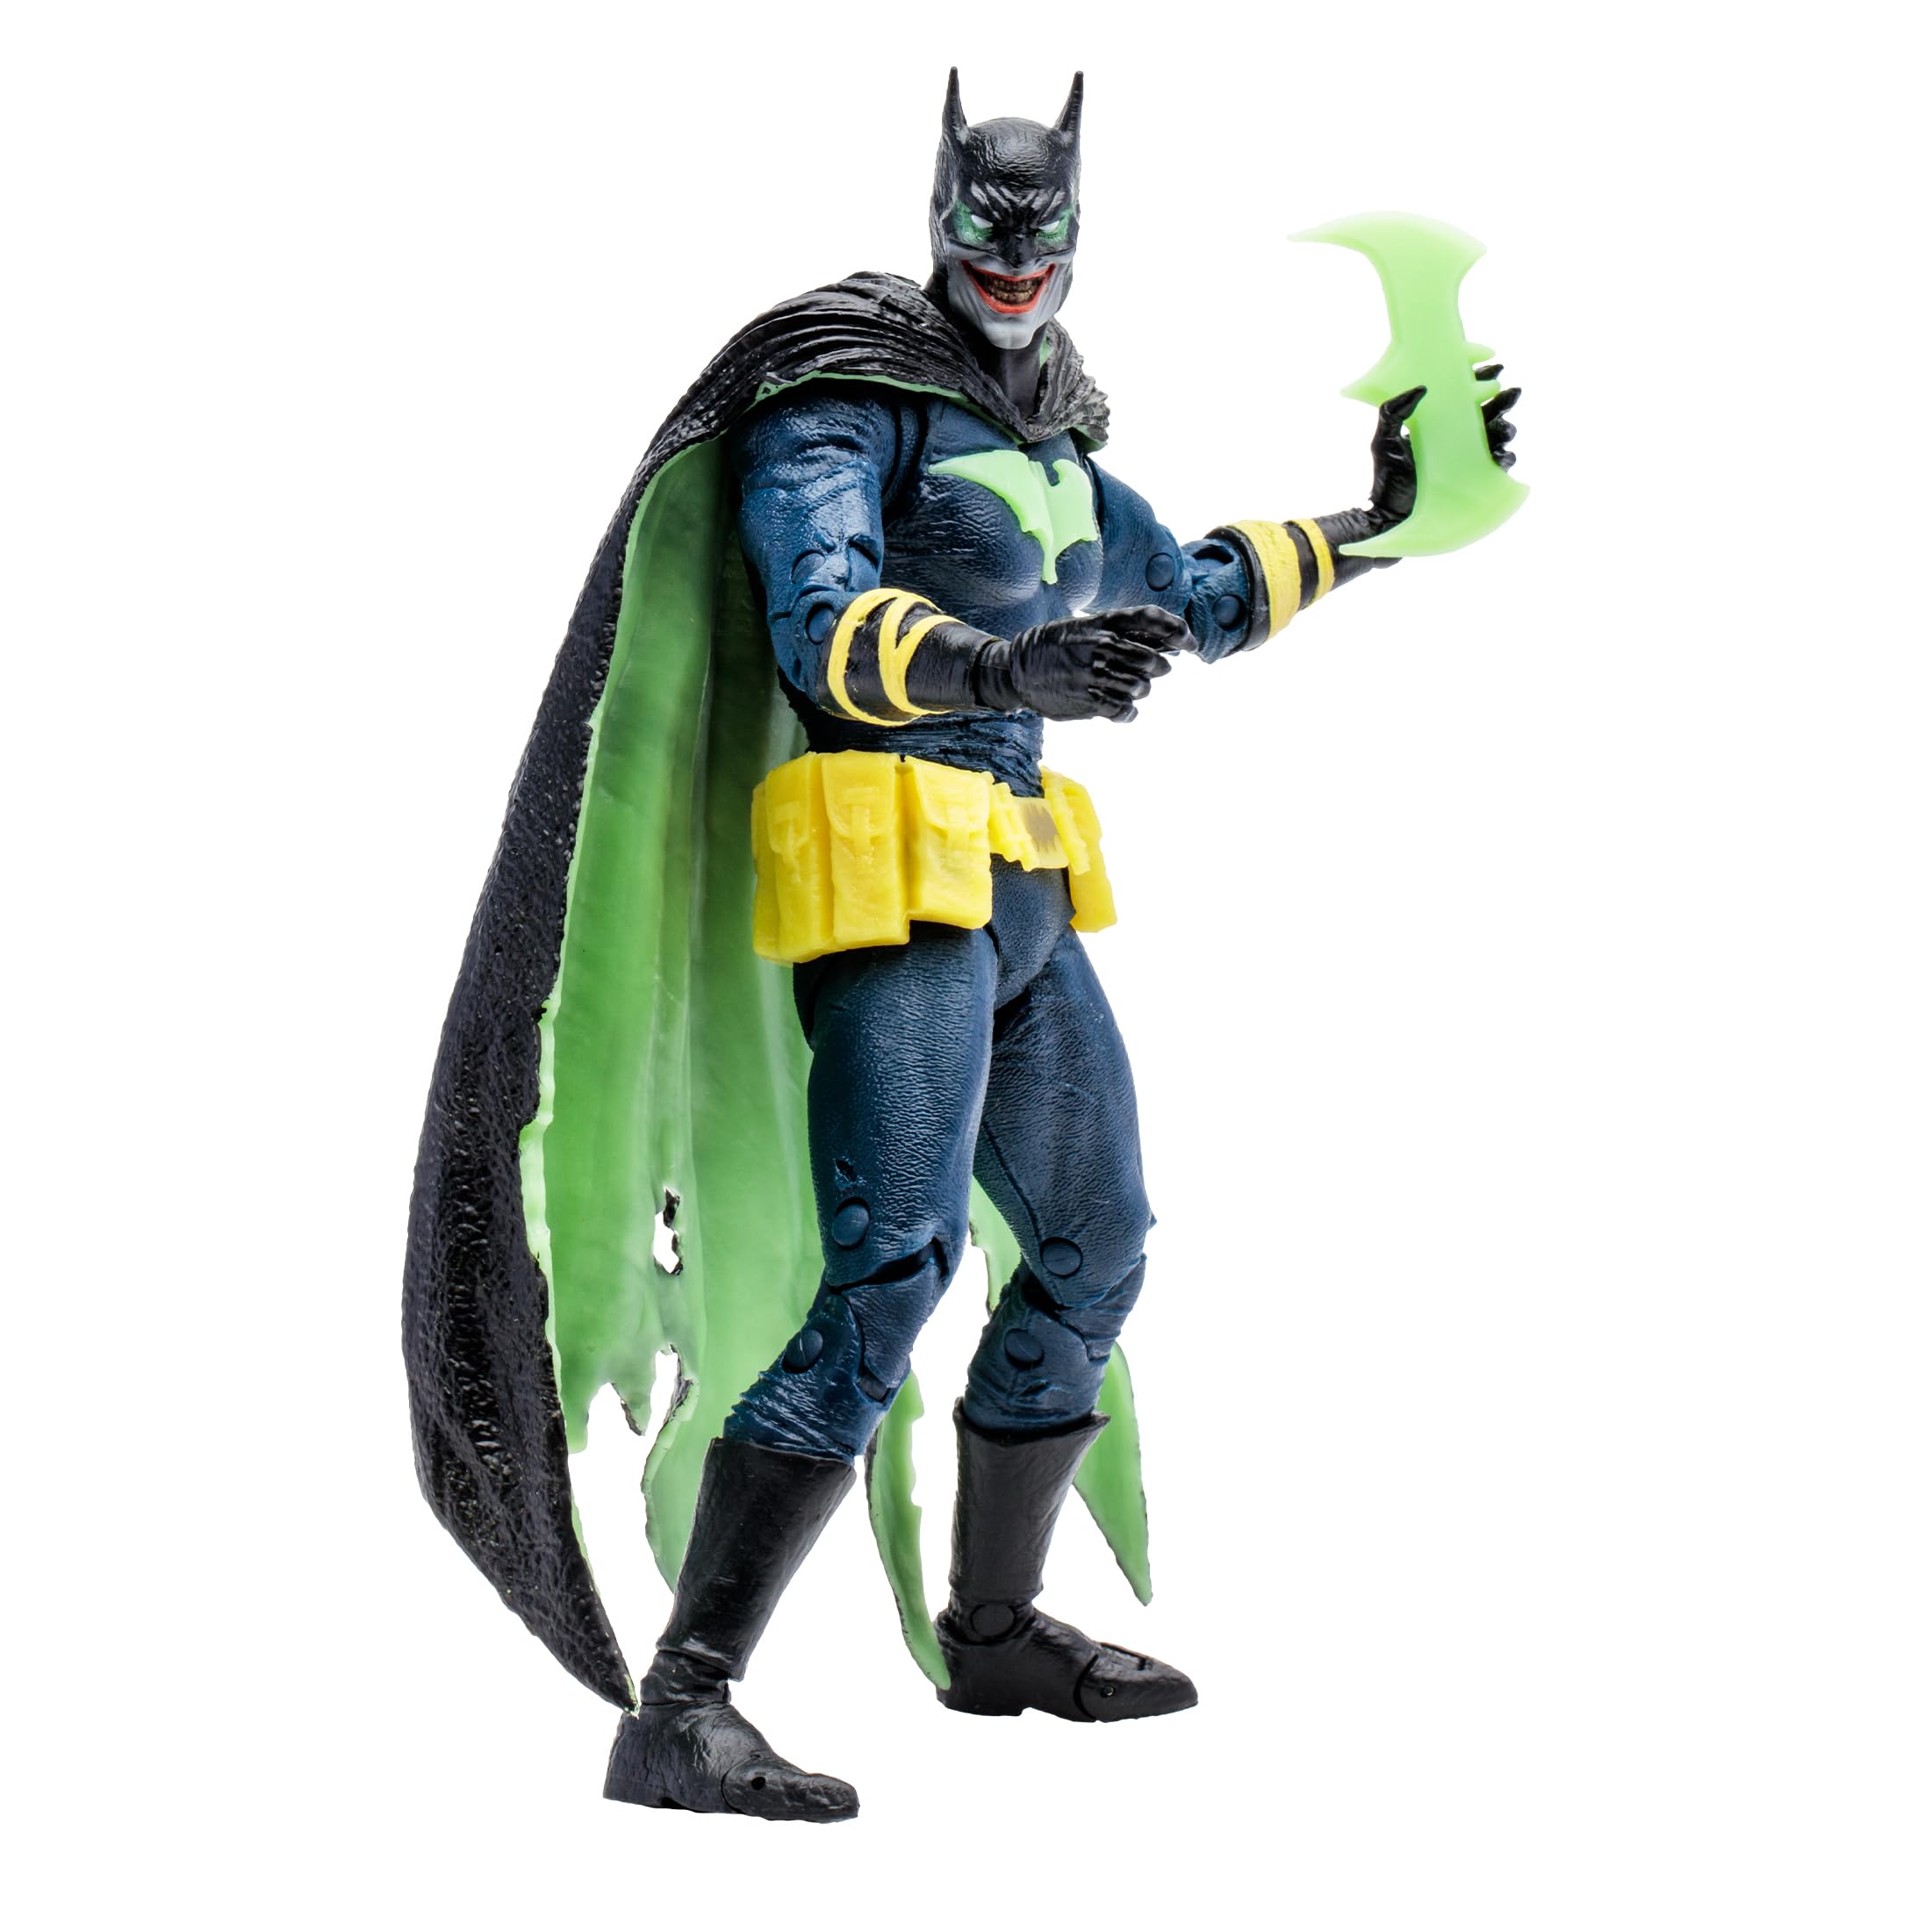 7" McFarlane Toys Batman of Earth -22 Infected Glow In The Dark Action Figure w/ Batarang & Art Card $19.50 + Free Shipping w/ Prime or on $35+